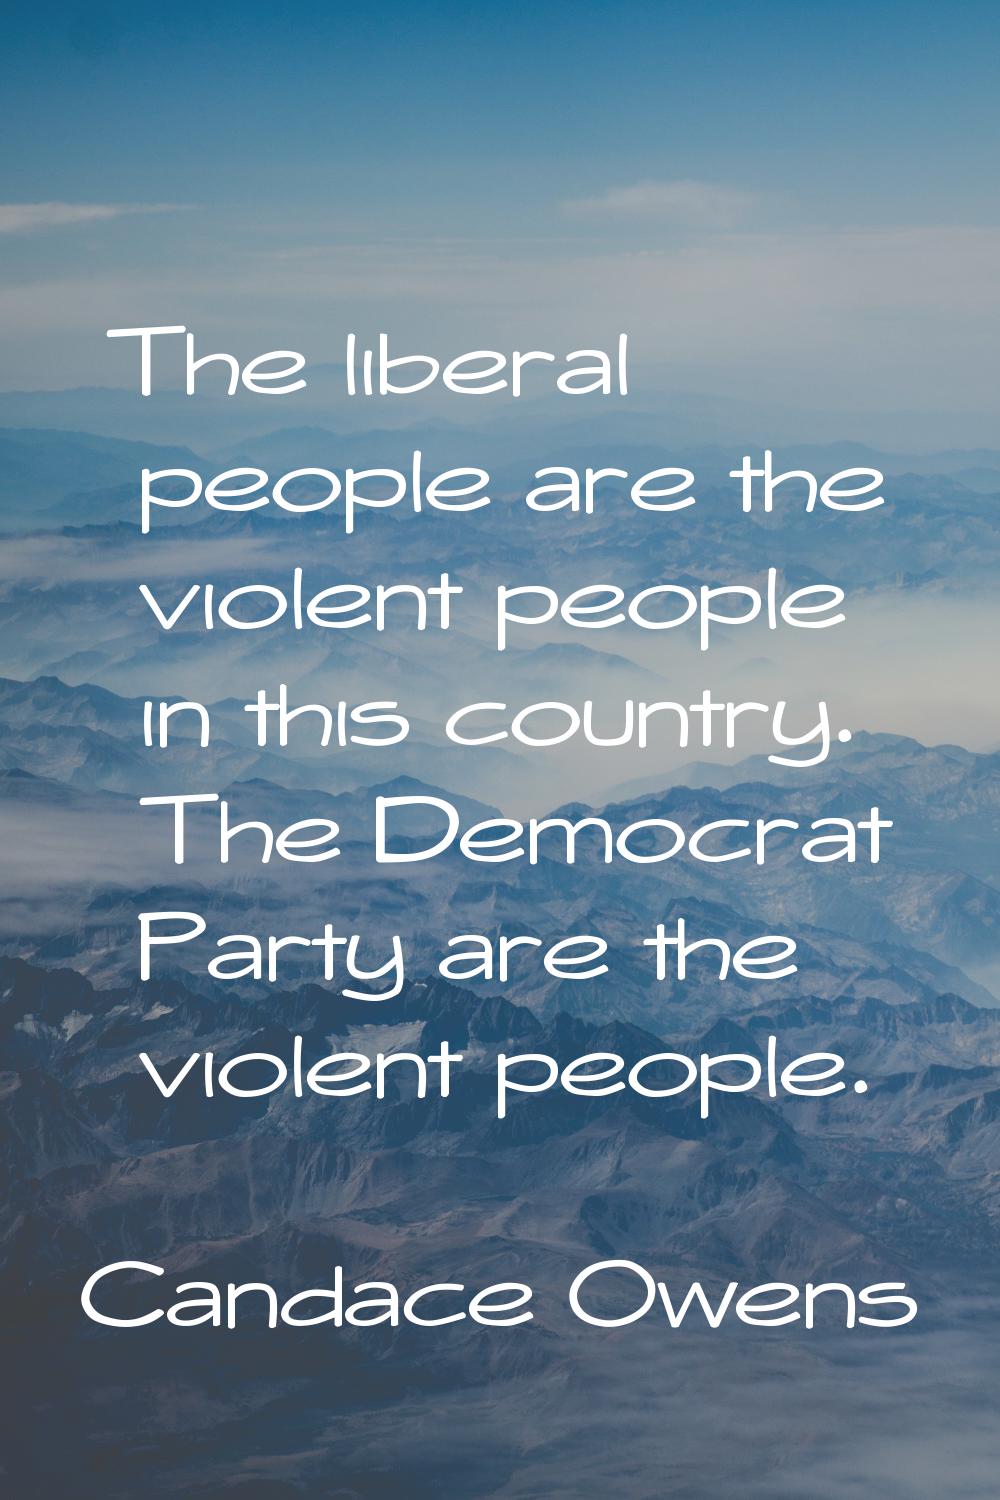 The liberal people are the violent people in this country. The Democrat Party are the violent peopl